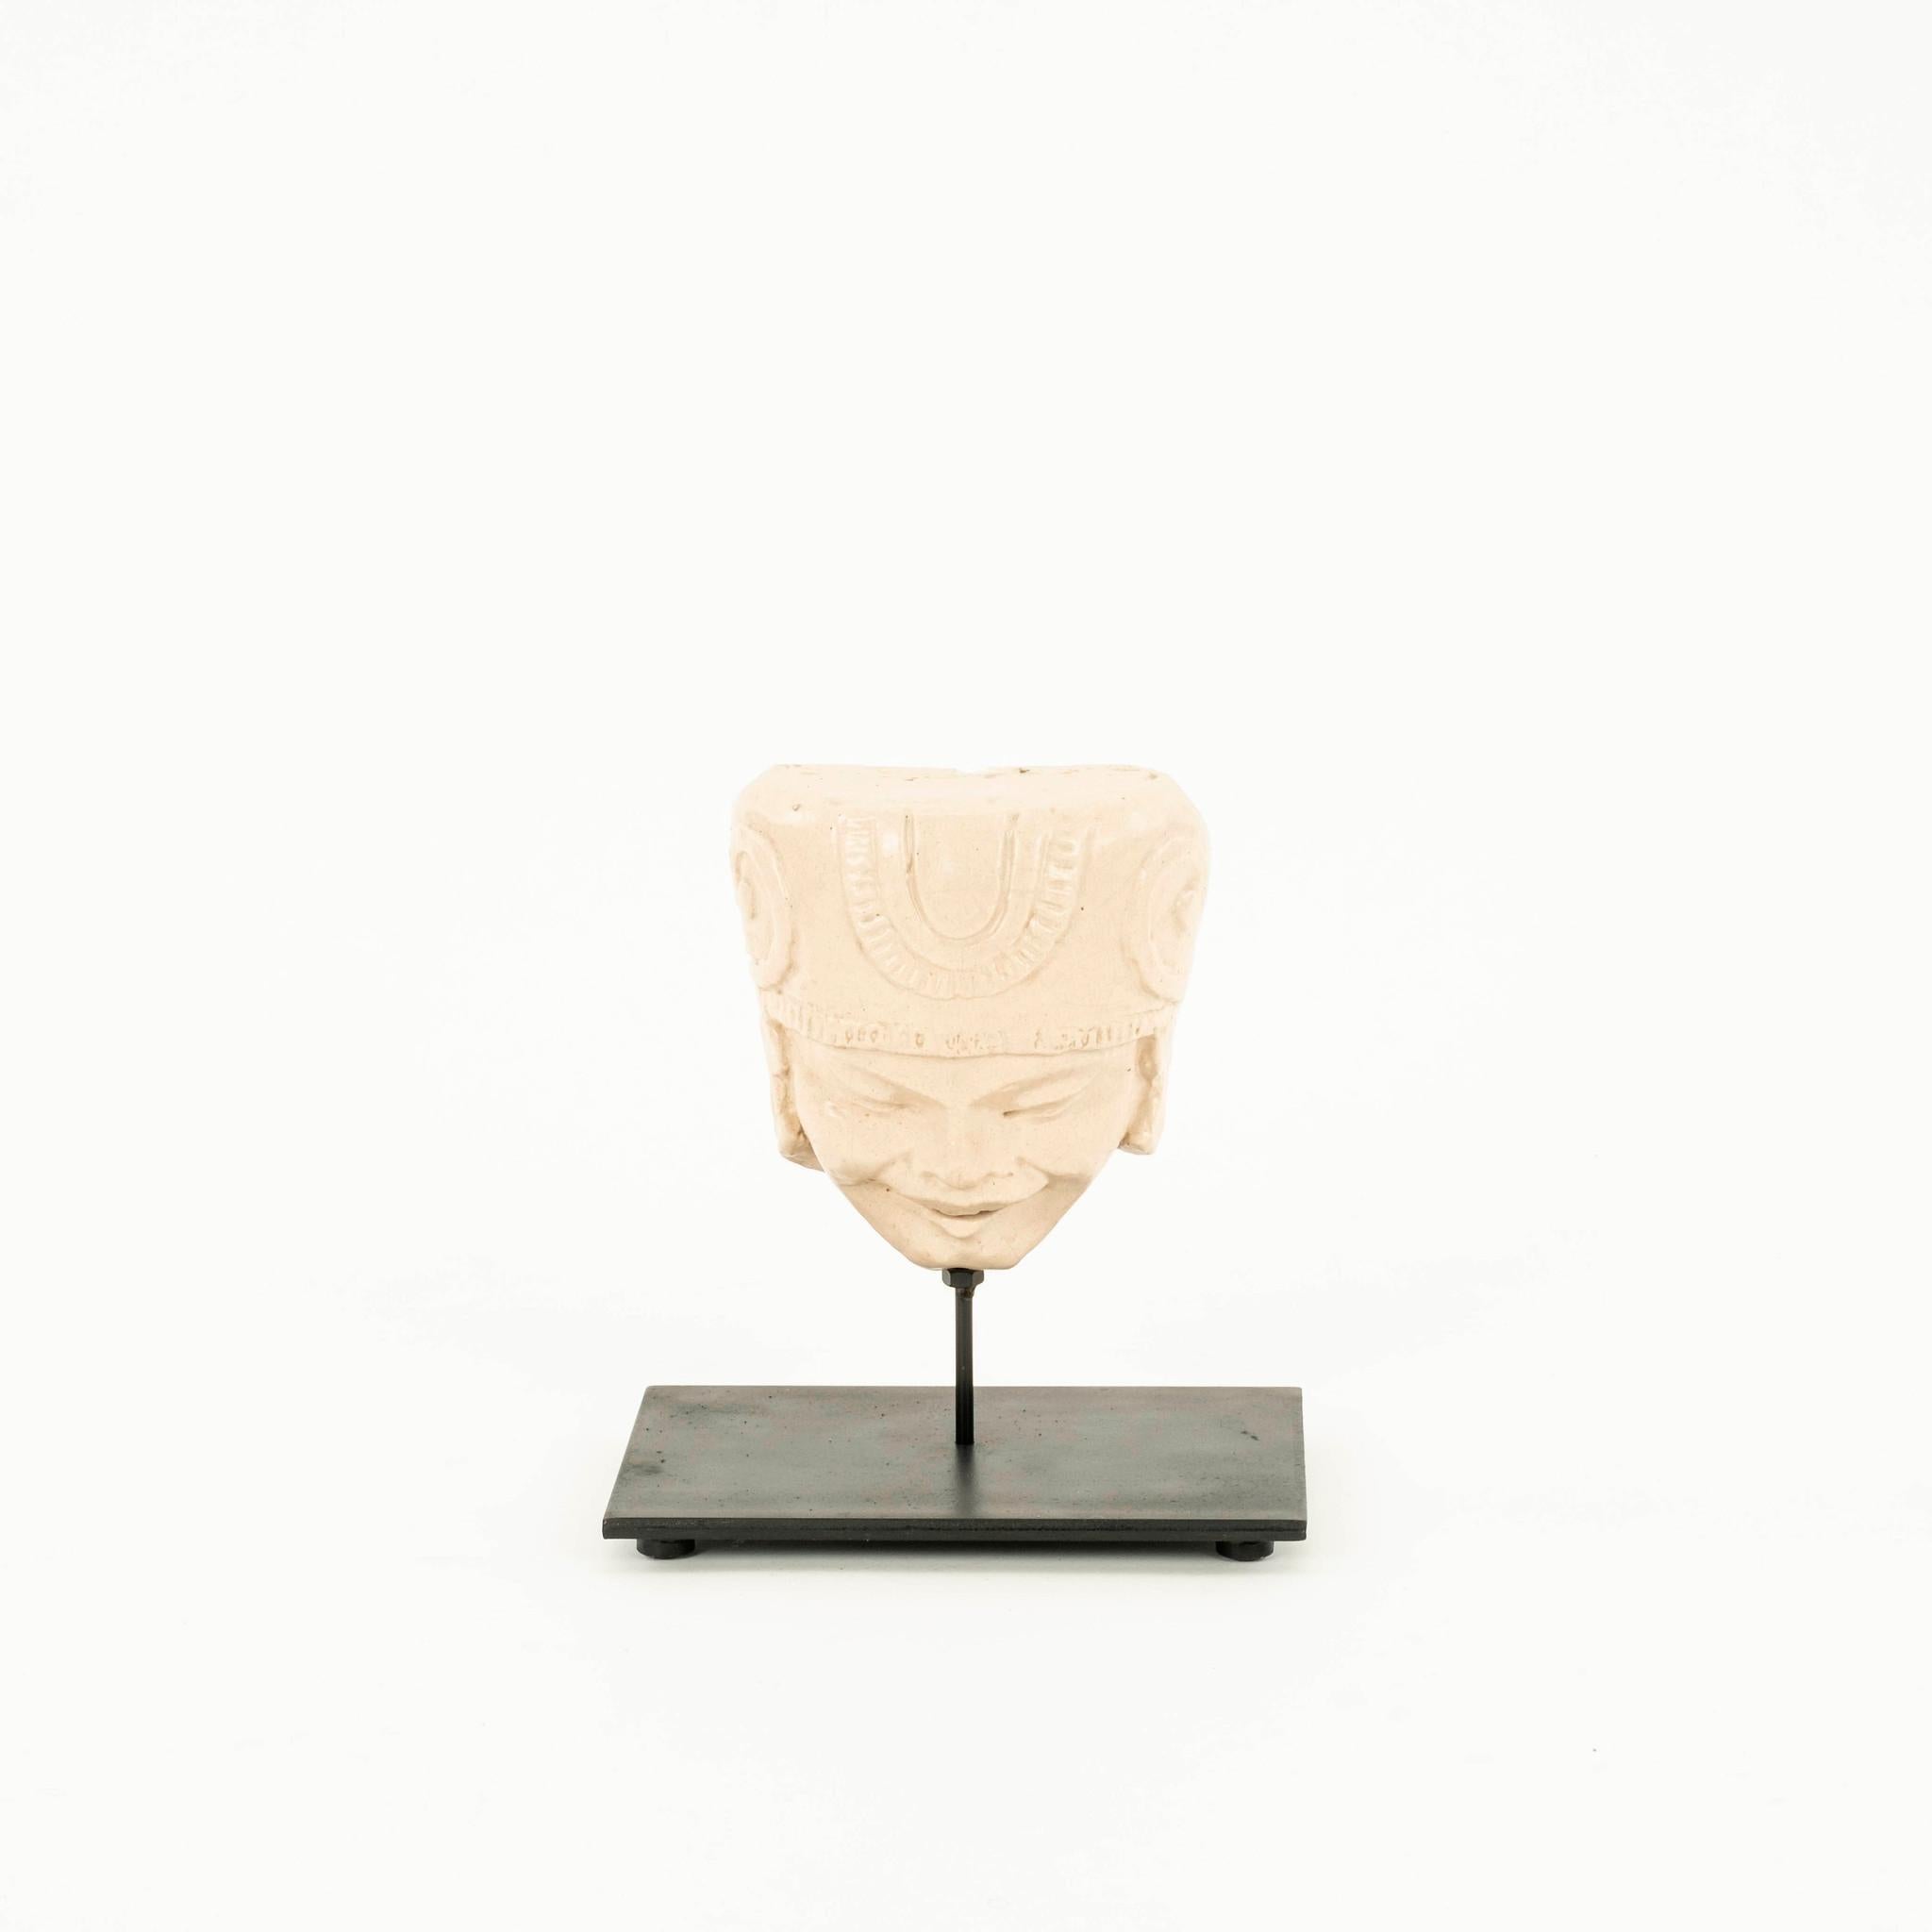 Early 20th Century figural cast clay face mask mounted on steel stand.